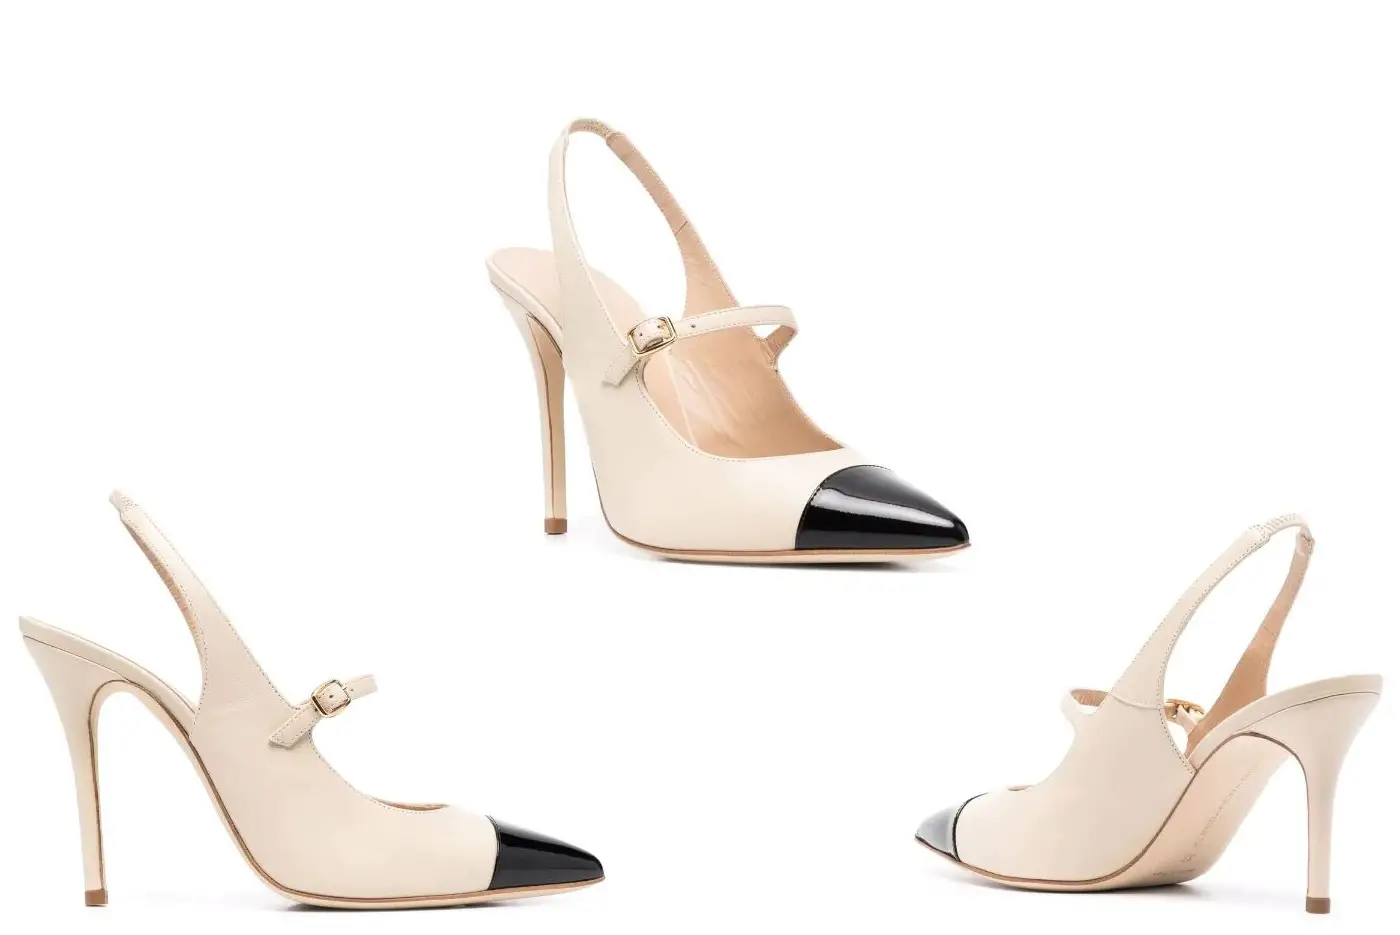 The Duchess of cambridge wore Alessandra Rich Fab Two Tone Pumps